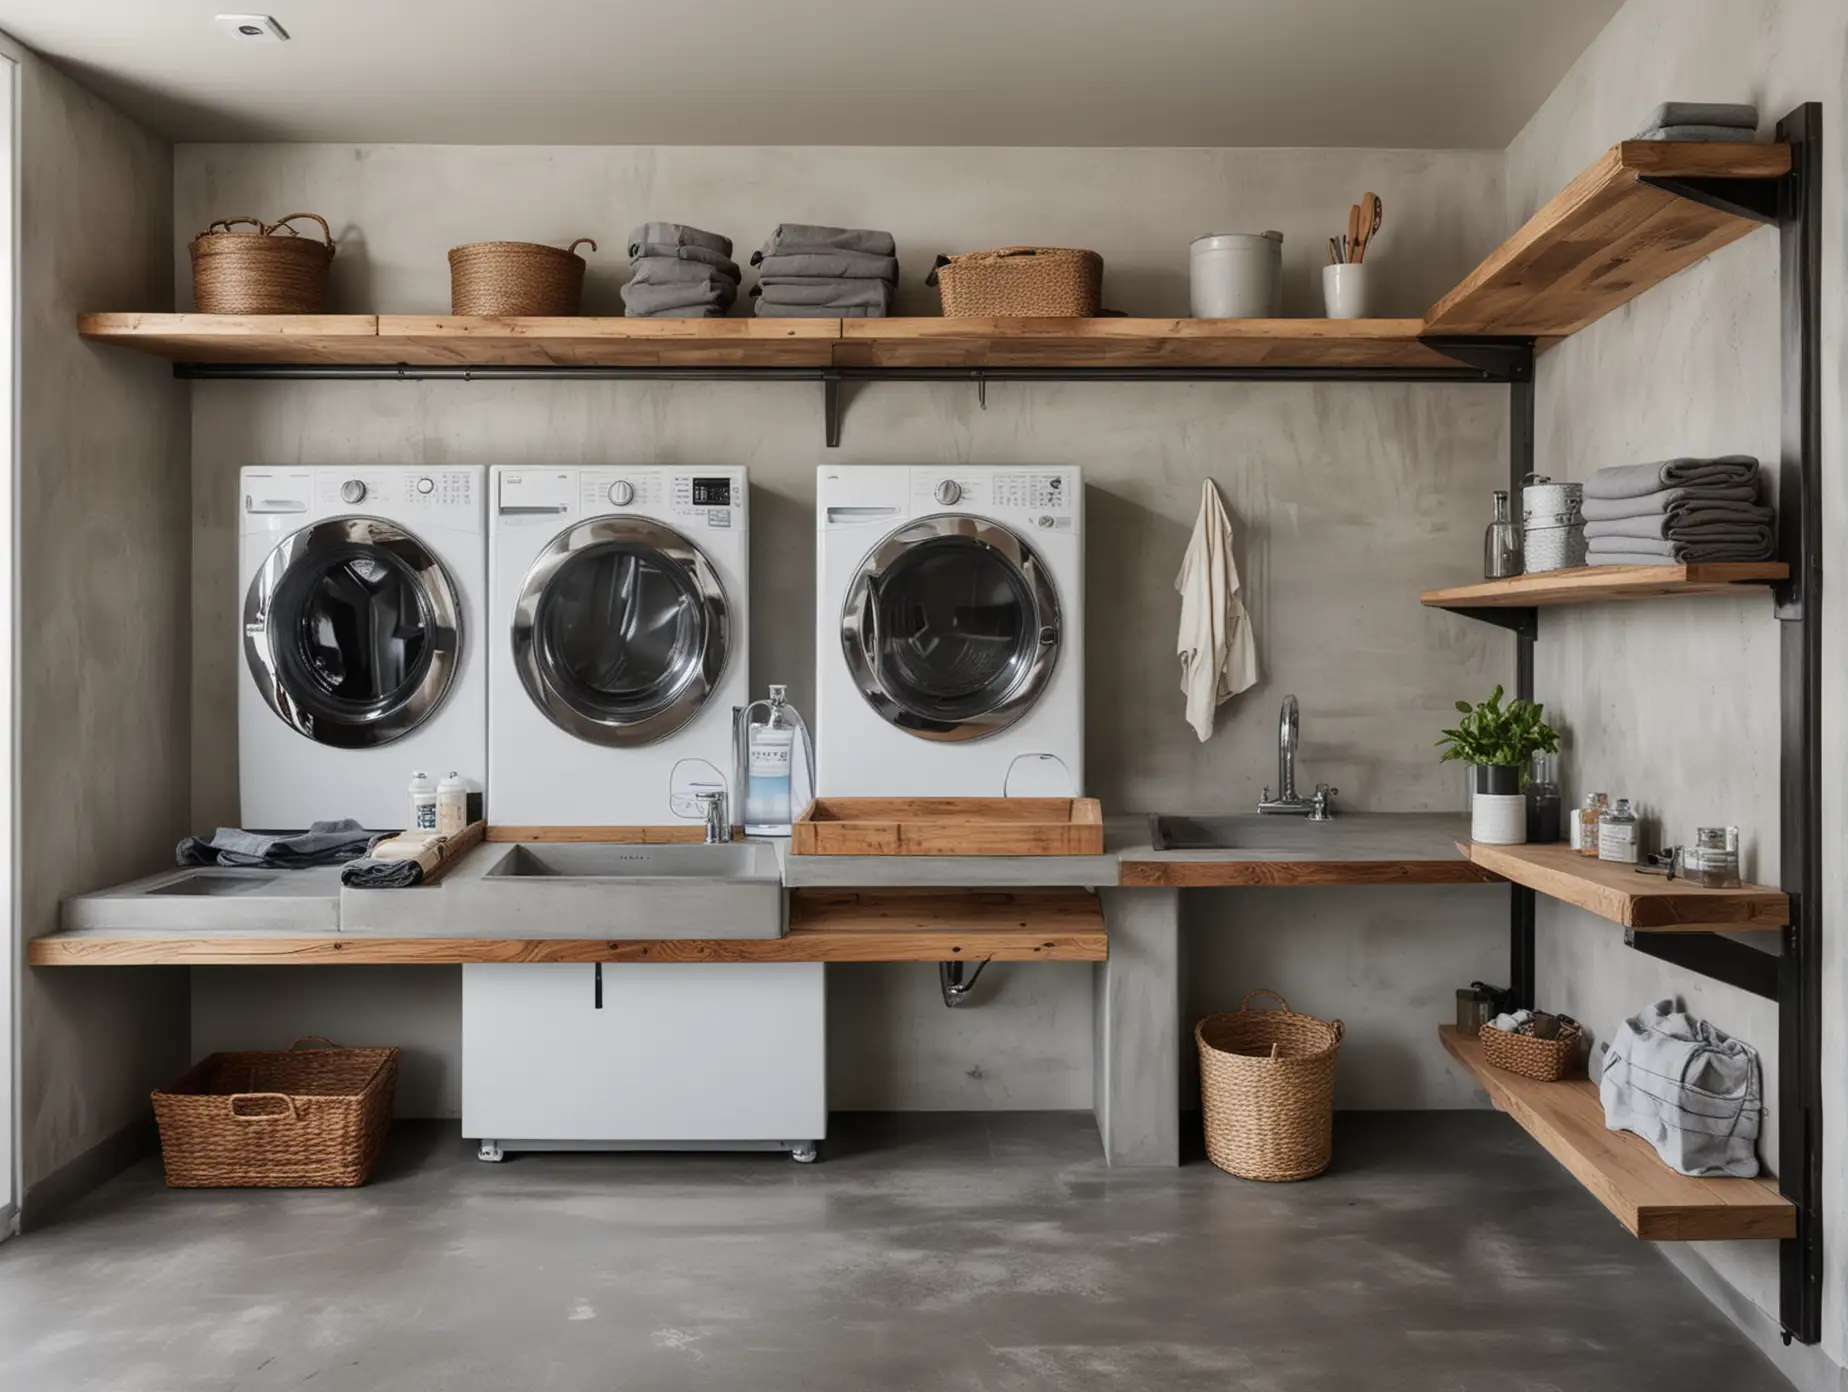 Modern-Laundry-Room-with-Reclaimed-Wood-Shelving-and-Polished-Concrete-Floors